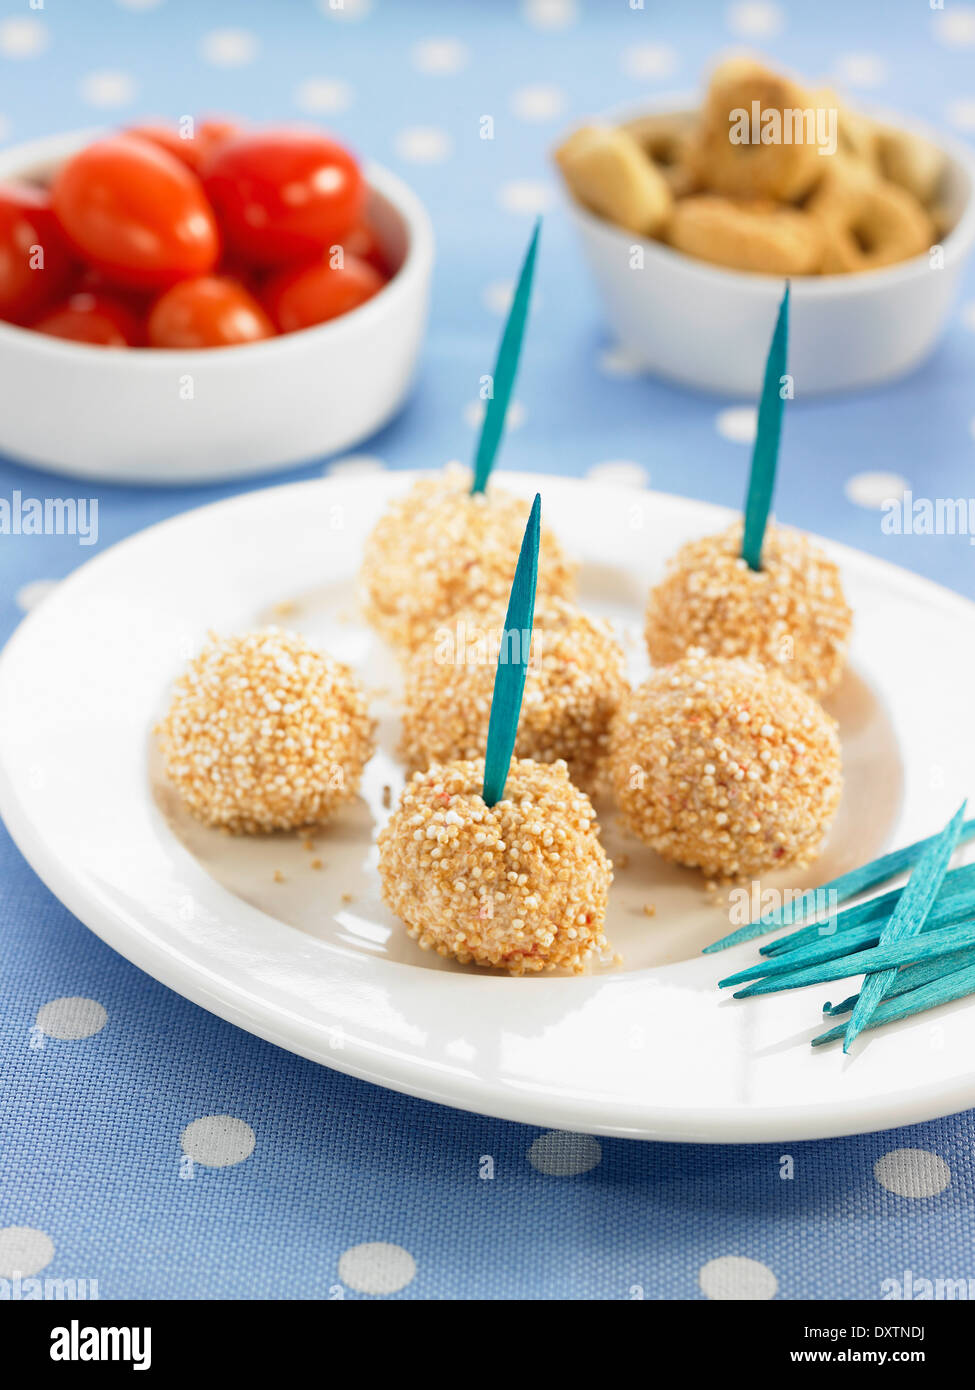 Goat's cheese and amaranto cereal balls Stock Photo